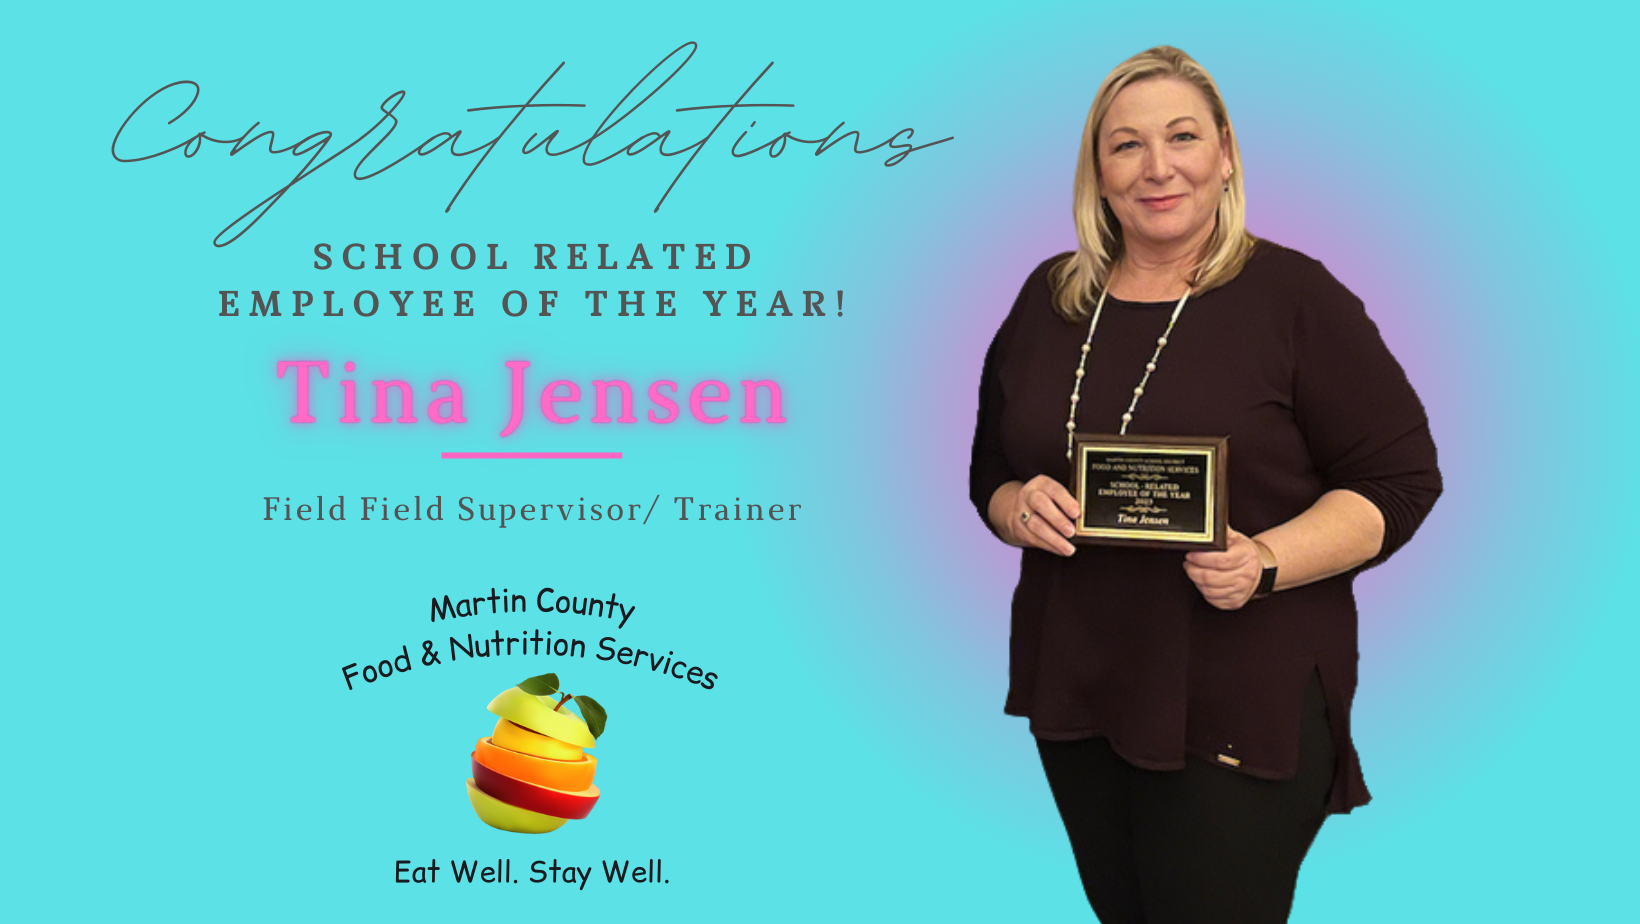 Congratulations to Tina Jensen, School Related Employee of the Year